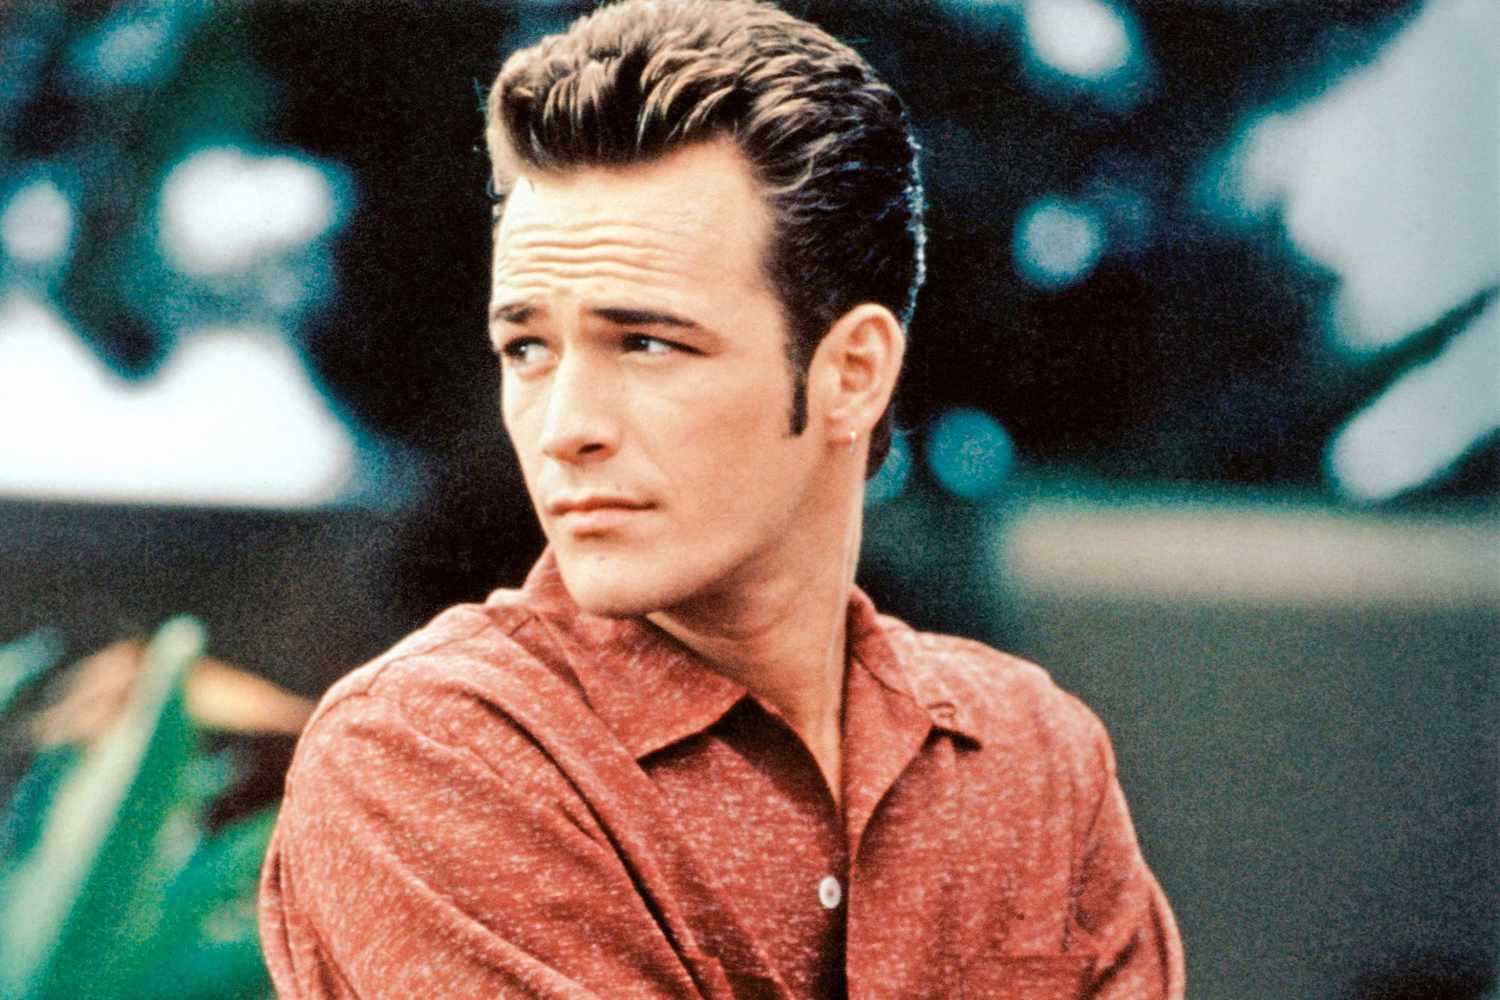 BEVERLY HILLS 90210, Luke Perry, 1990-2000. &copy; Aaron Spelling Prod. / Courtesy: Everett Collection